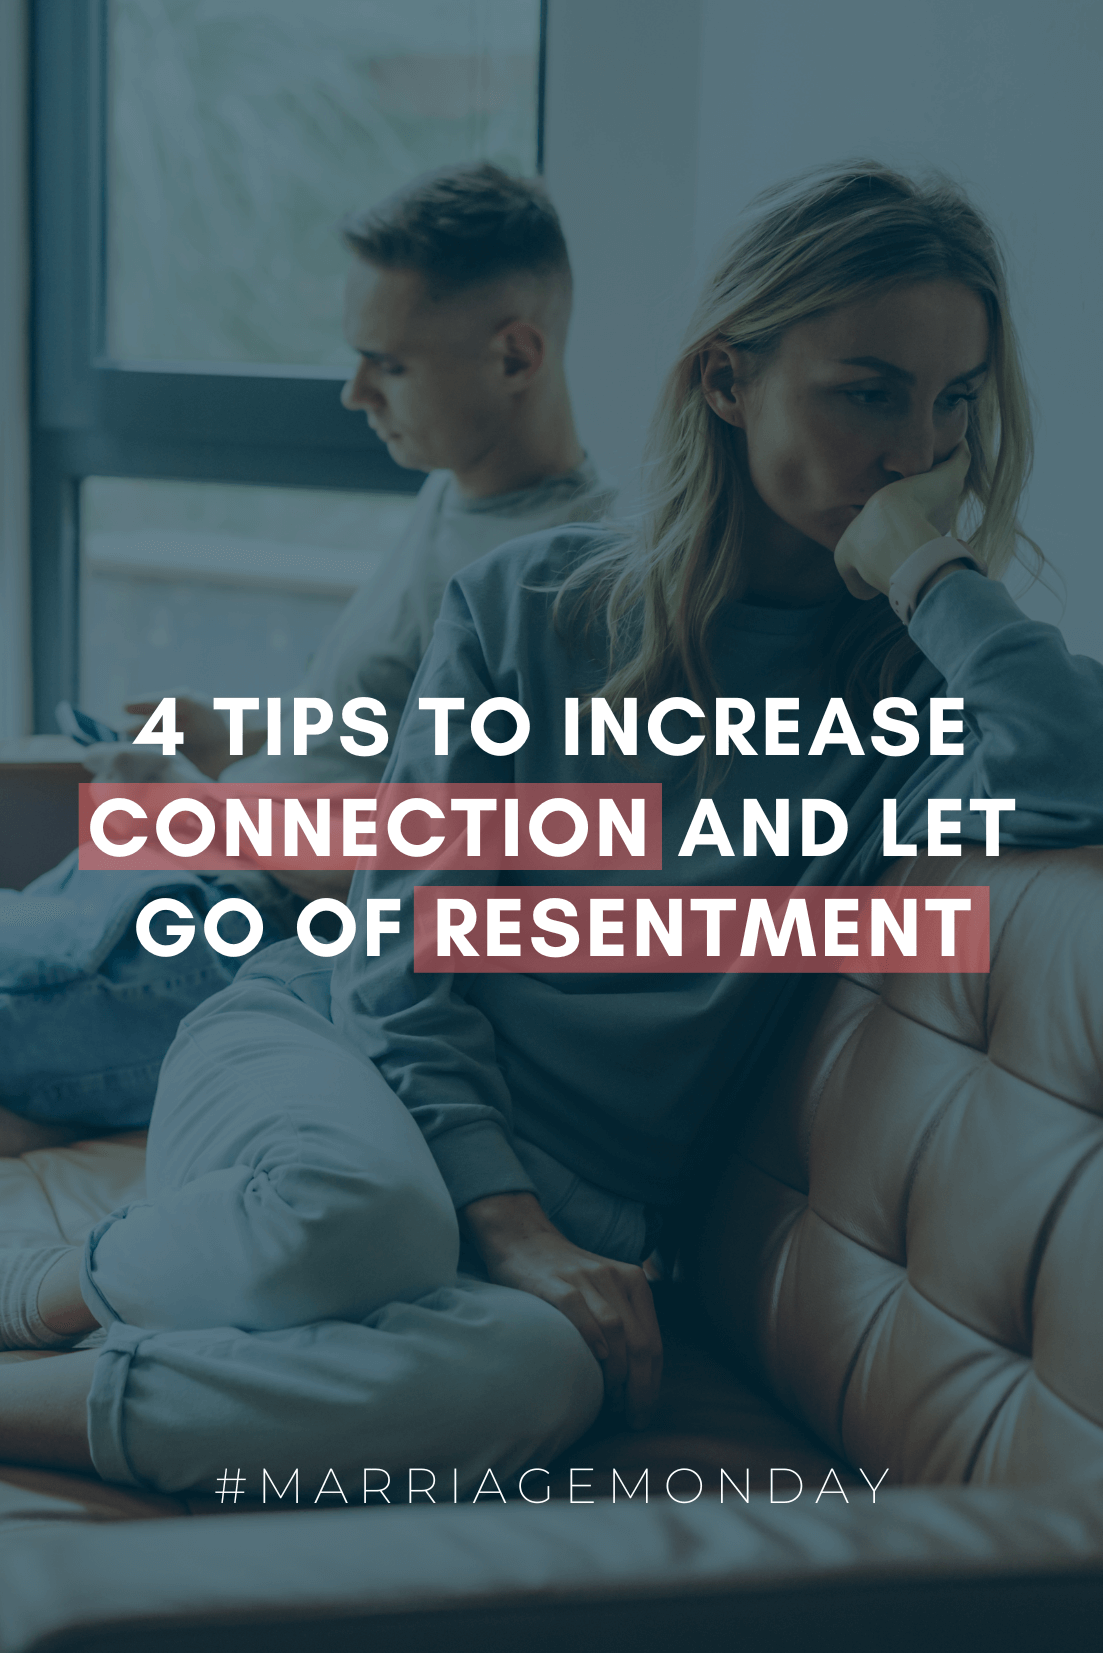 4 Tips to Increase Connection and Let Go of Resentment  | #MarriageMonday